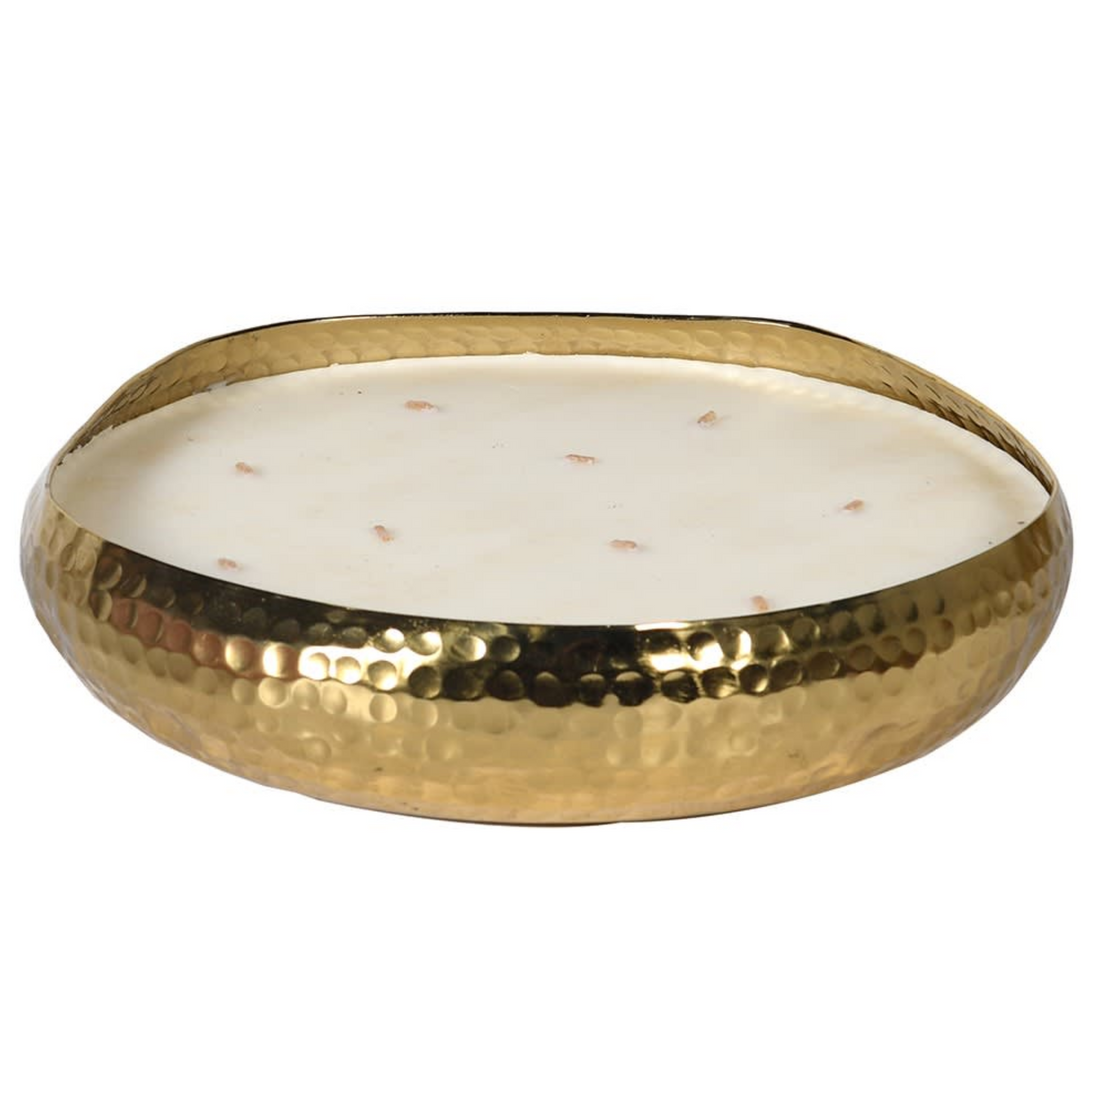 MEDIUM 10 WICK SCENTED CANDLE IN HAMMERED GOLD DISH | BALSAM FOREST